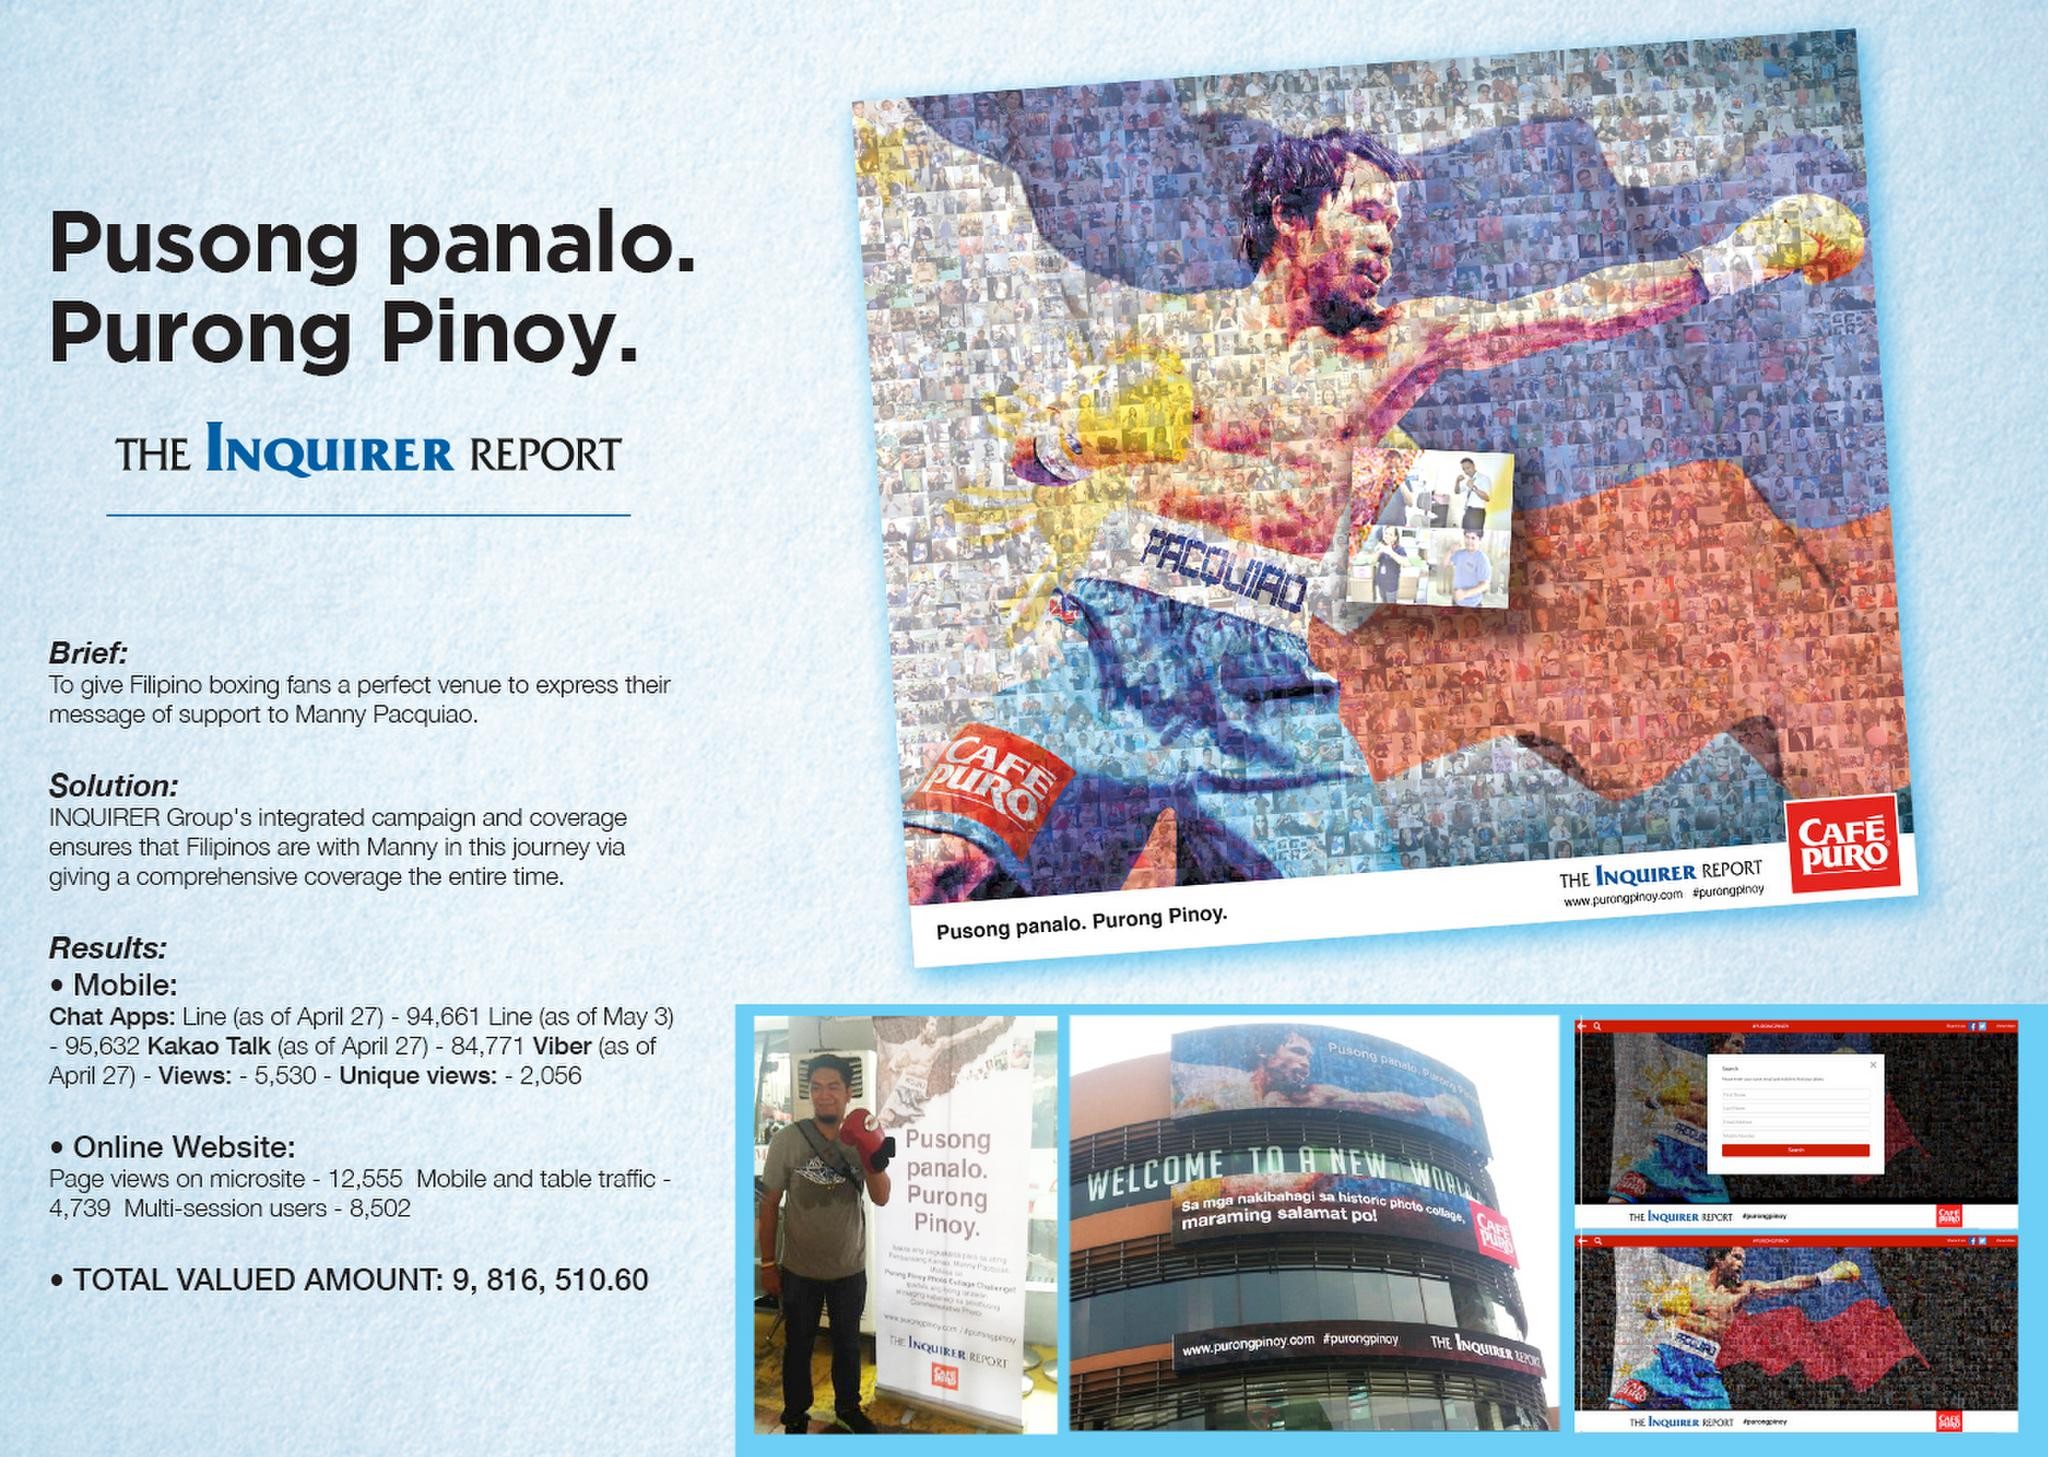 The Inquirer Report: Pusong Panalo. Purong Pinoy.